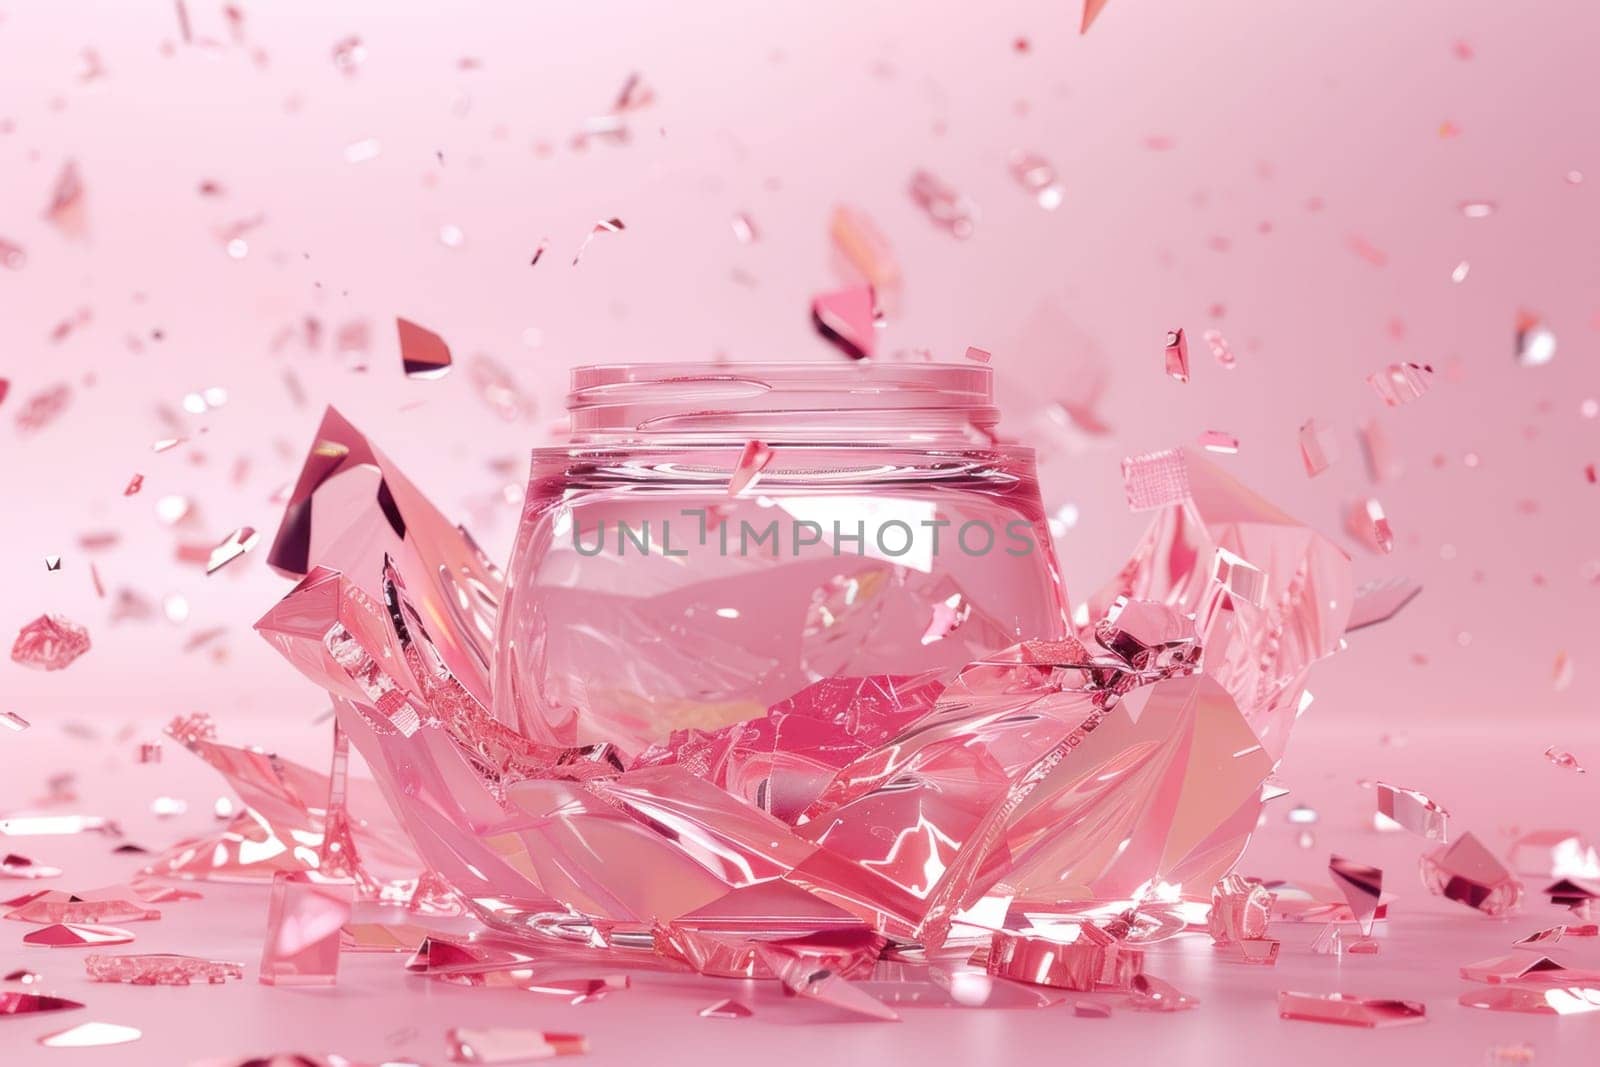 Crushed glass jar with pink confetti on a pink background for beauty, fashion, and art concept design